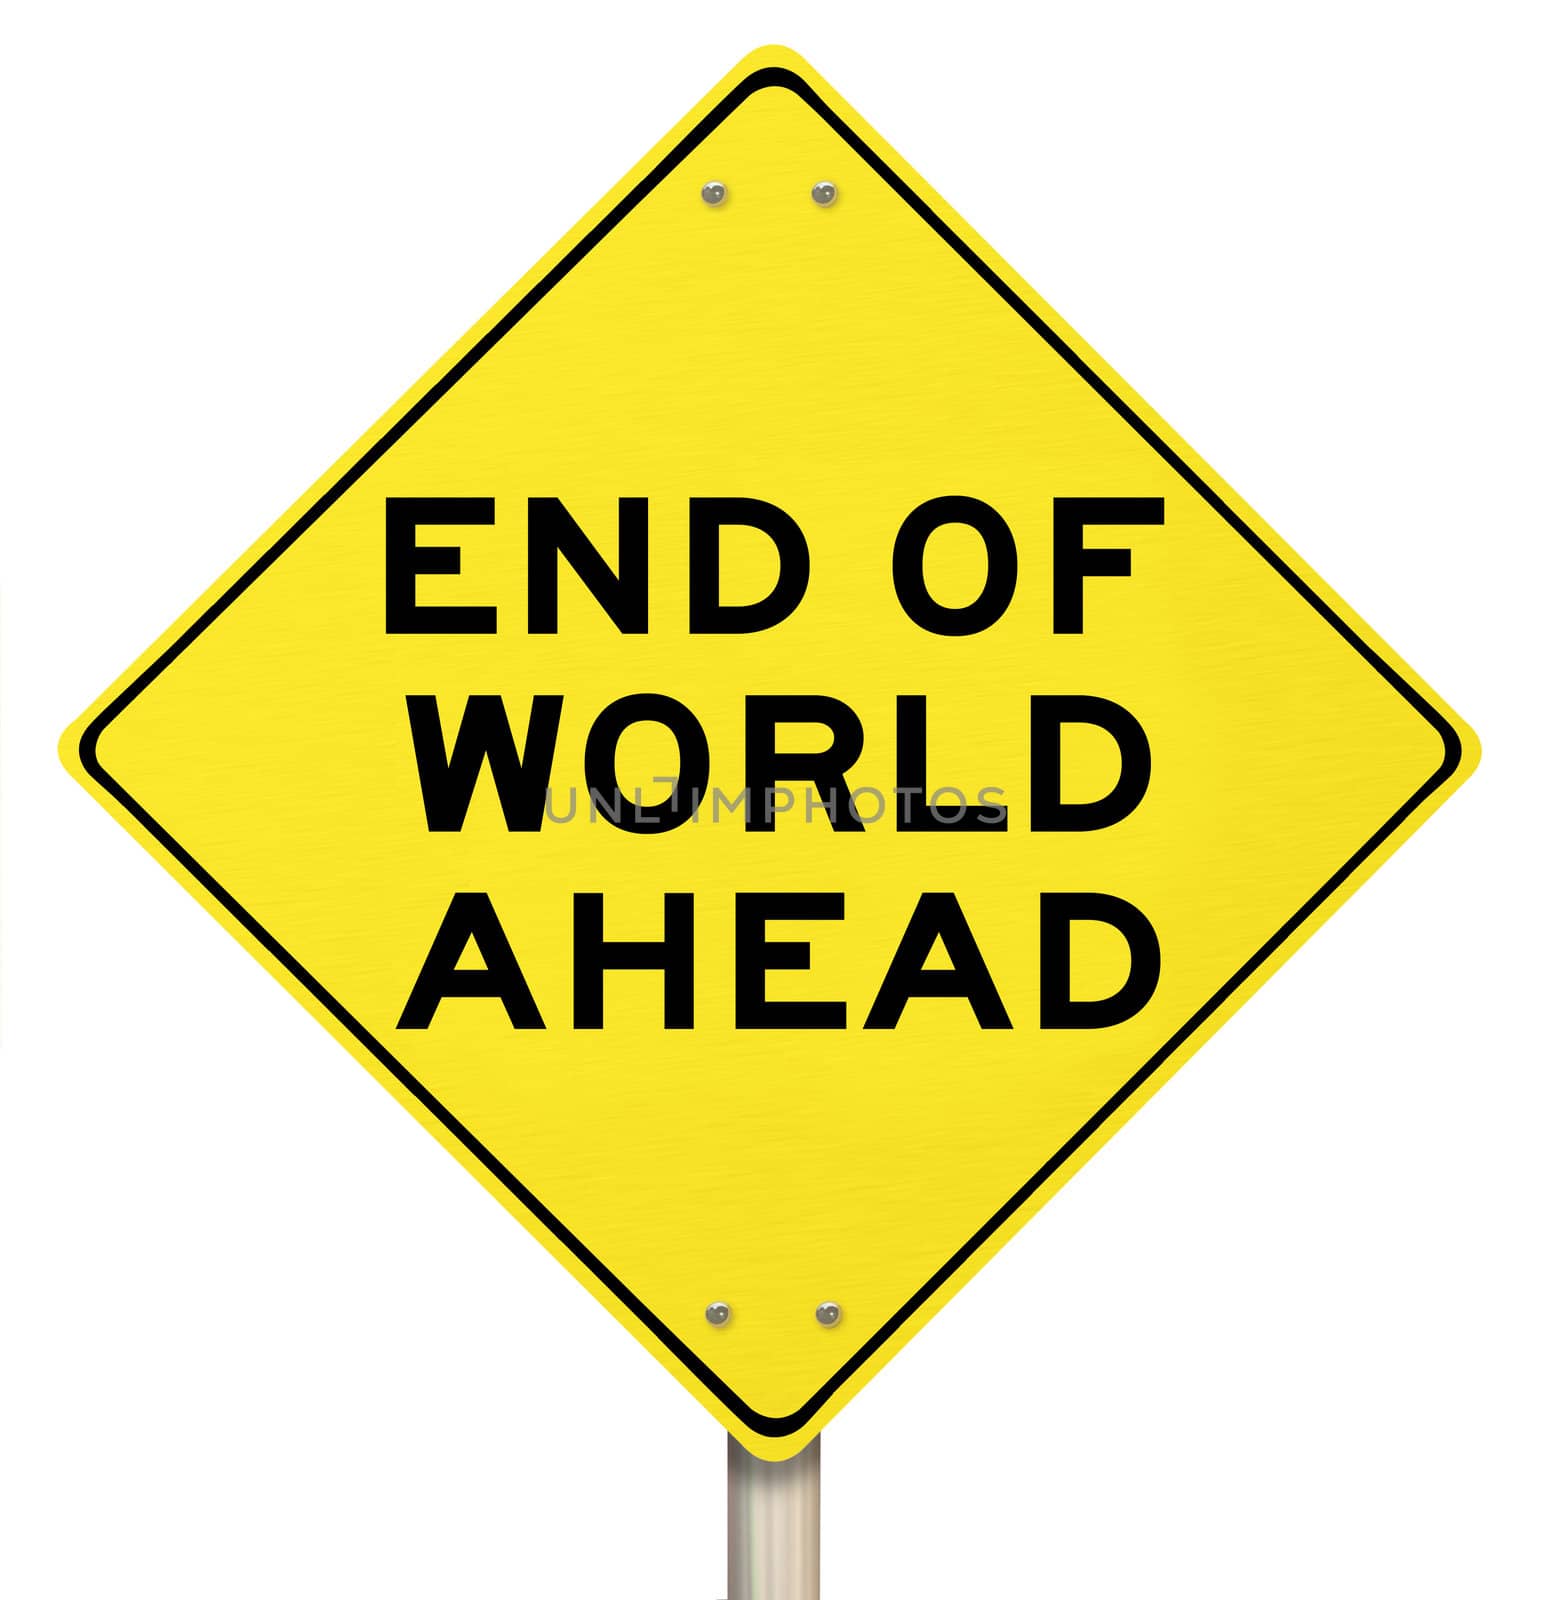 A yellow diamond-shaped road sign cautions people that the end of the world is ahead